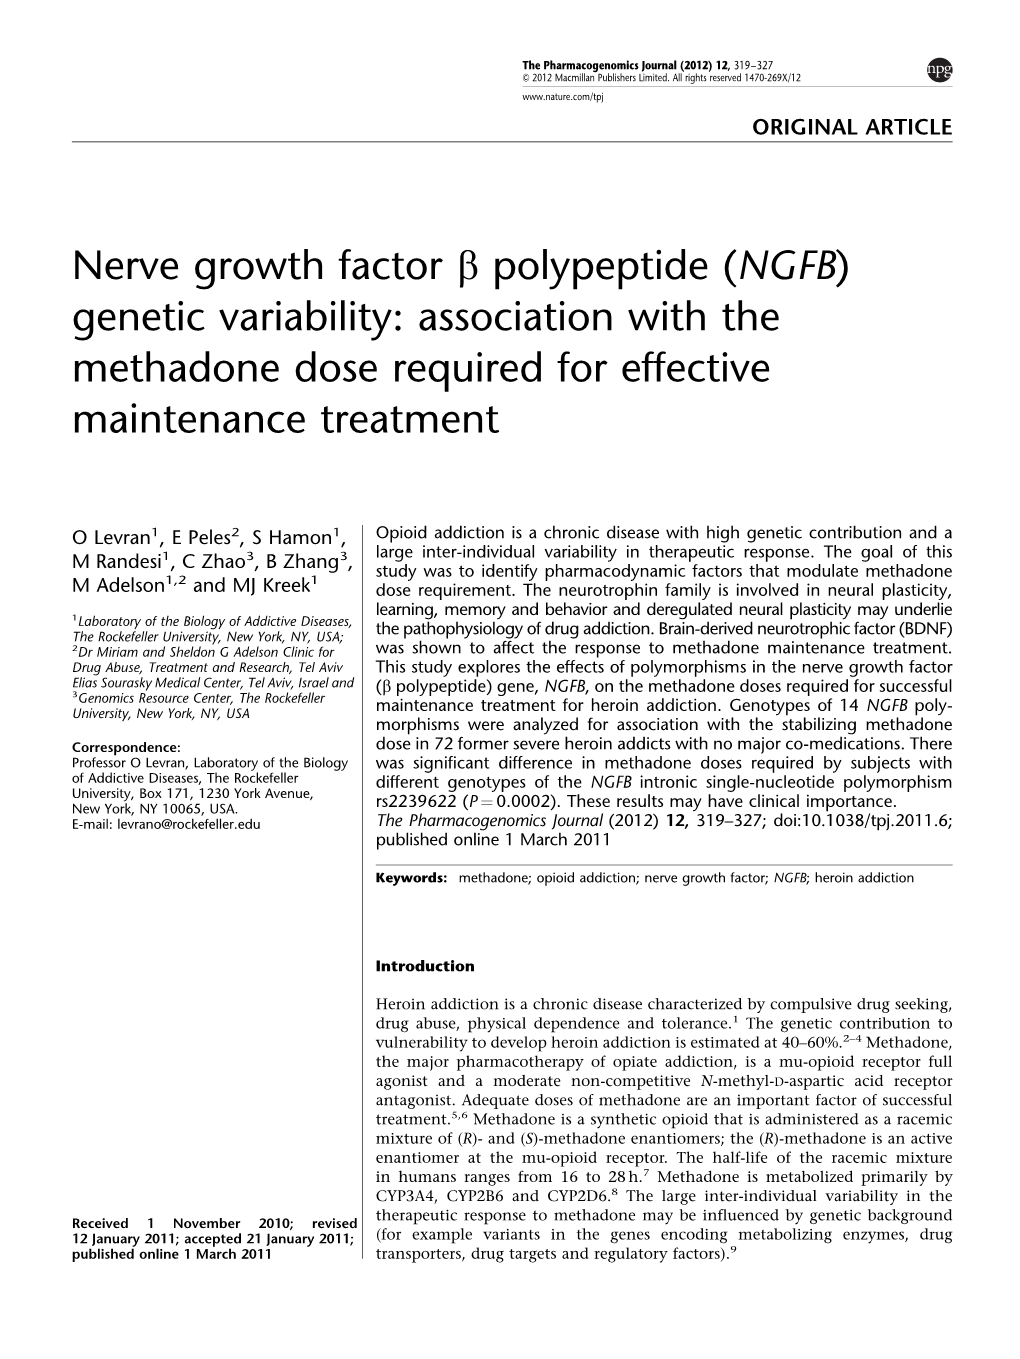 Nerve Growth Factor &Beta; Polypeptide (NGFB) Genetic Variability: Association with the Methadone Dose Required for Effectiv